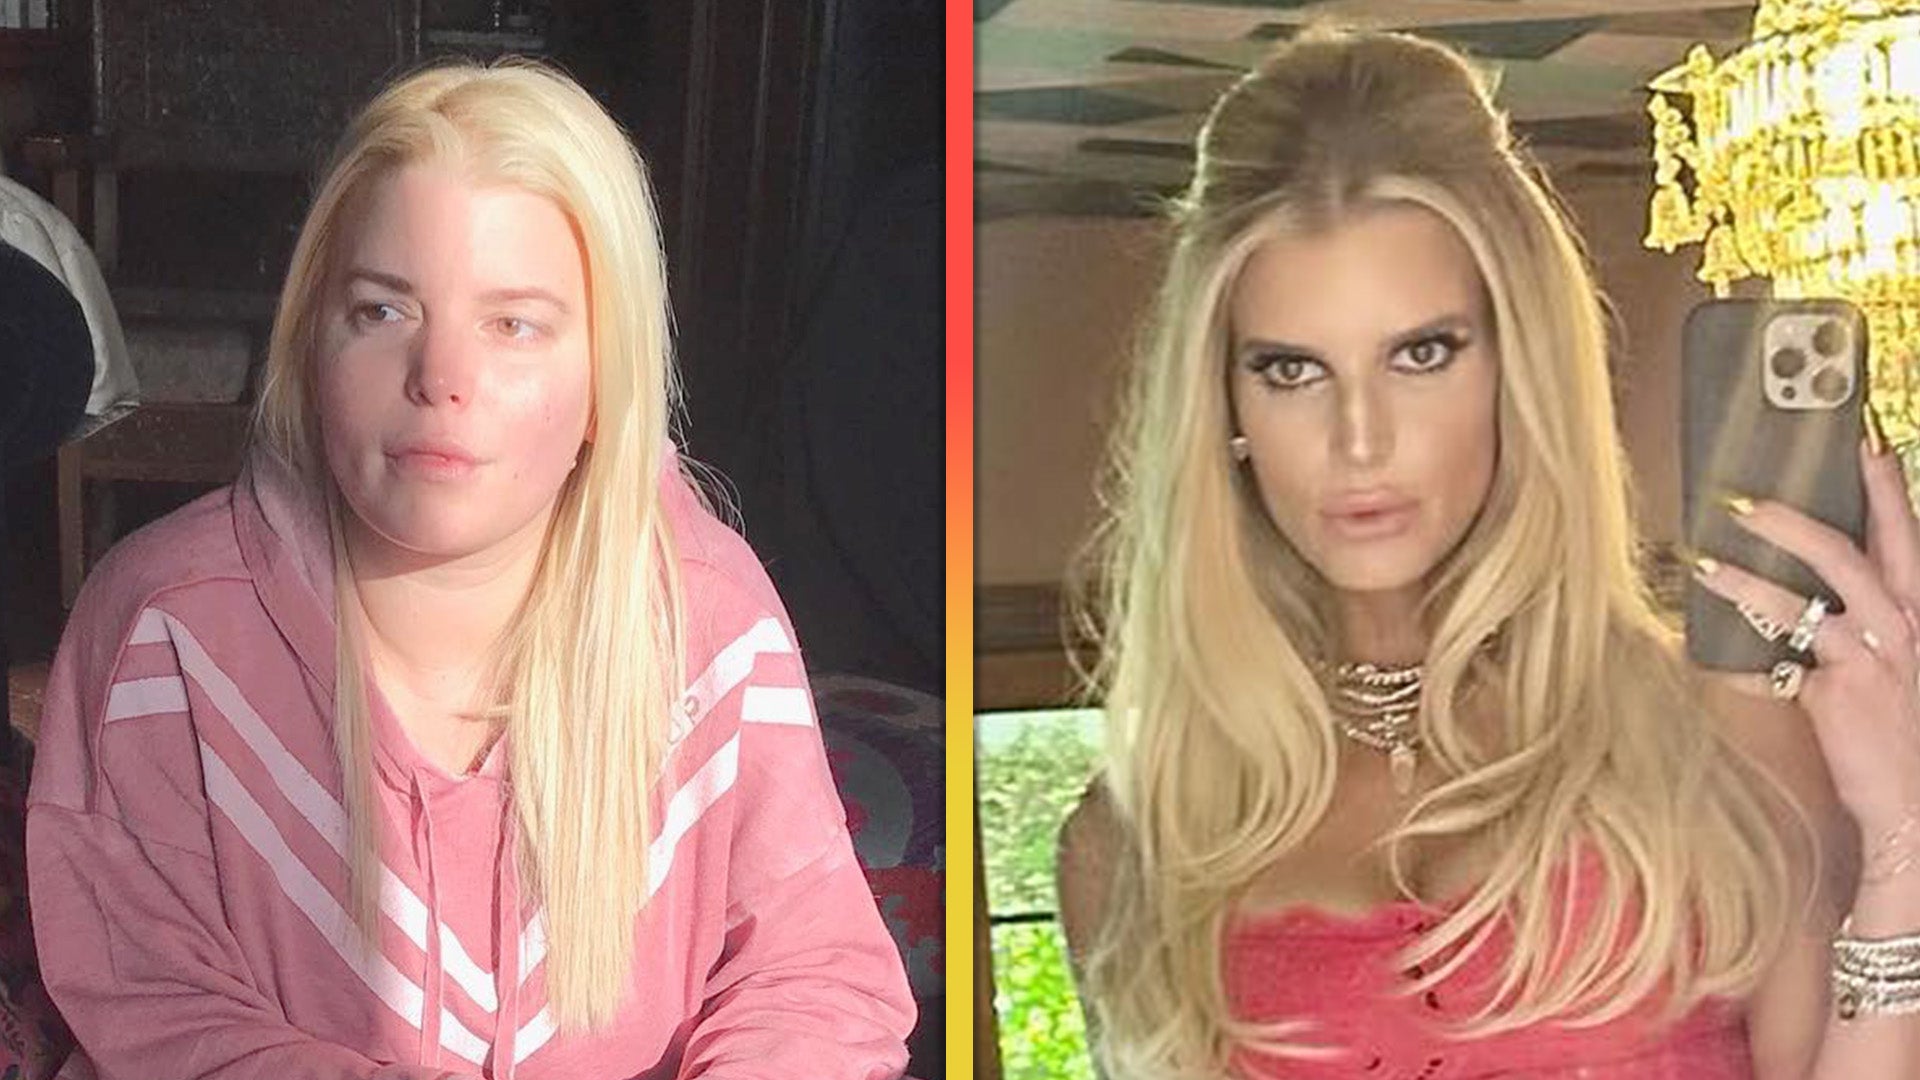 Jessica Simpson Celebrates Being 6 Years Sober By Sharing